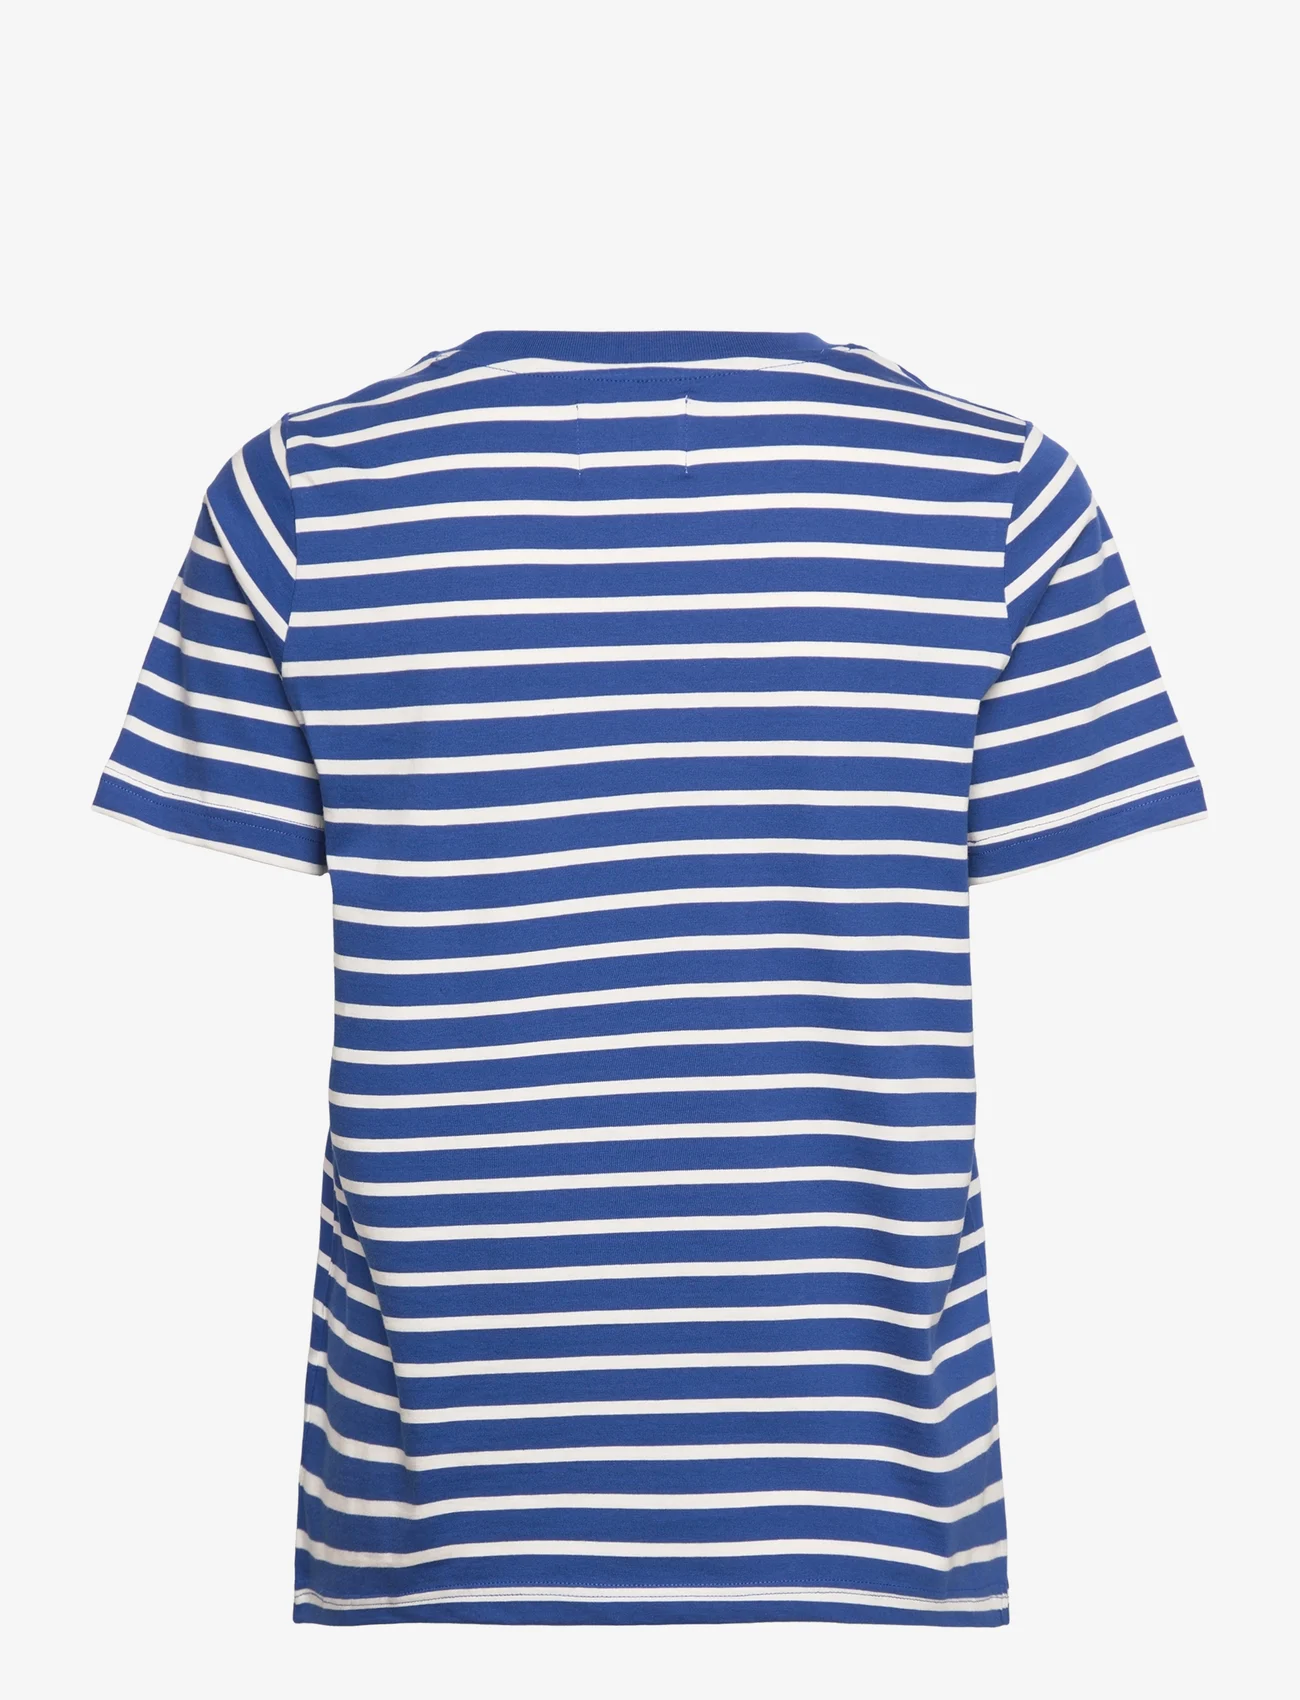 Double A by Wood Wood - Mia T-shirt - t-shirt & tops - limoges striped - 1